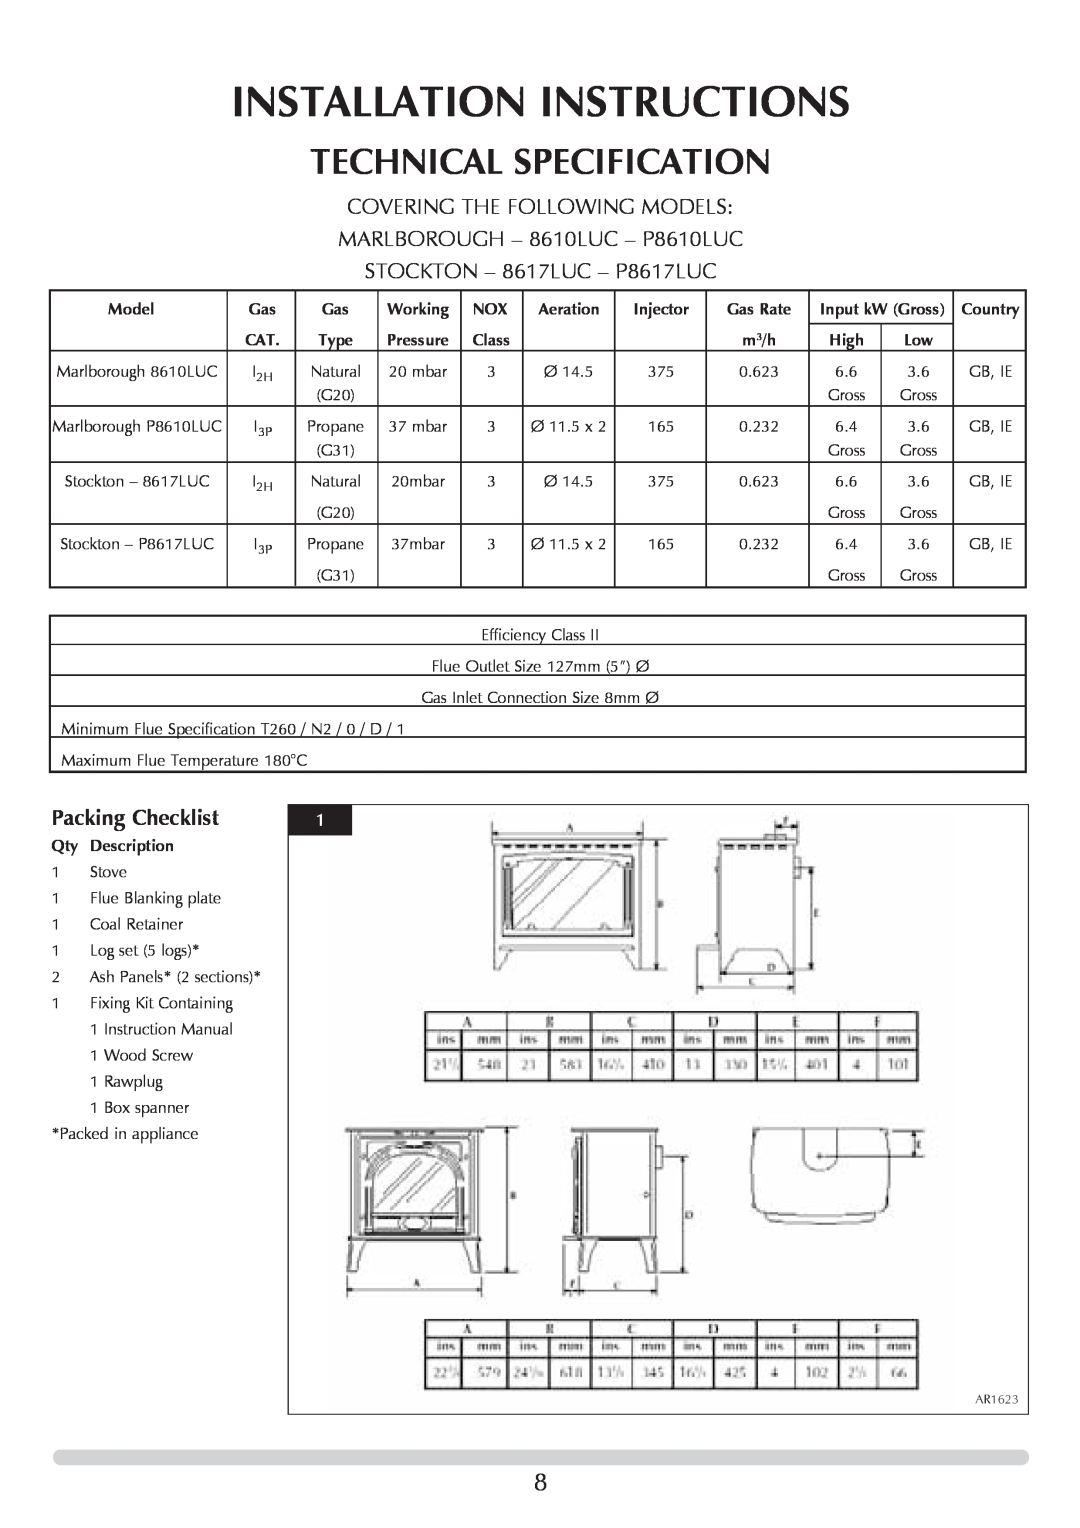 Stovax Stove Range Installation Instructions, Technical Specification, Covering The Following Models, Packing Checklist 